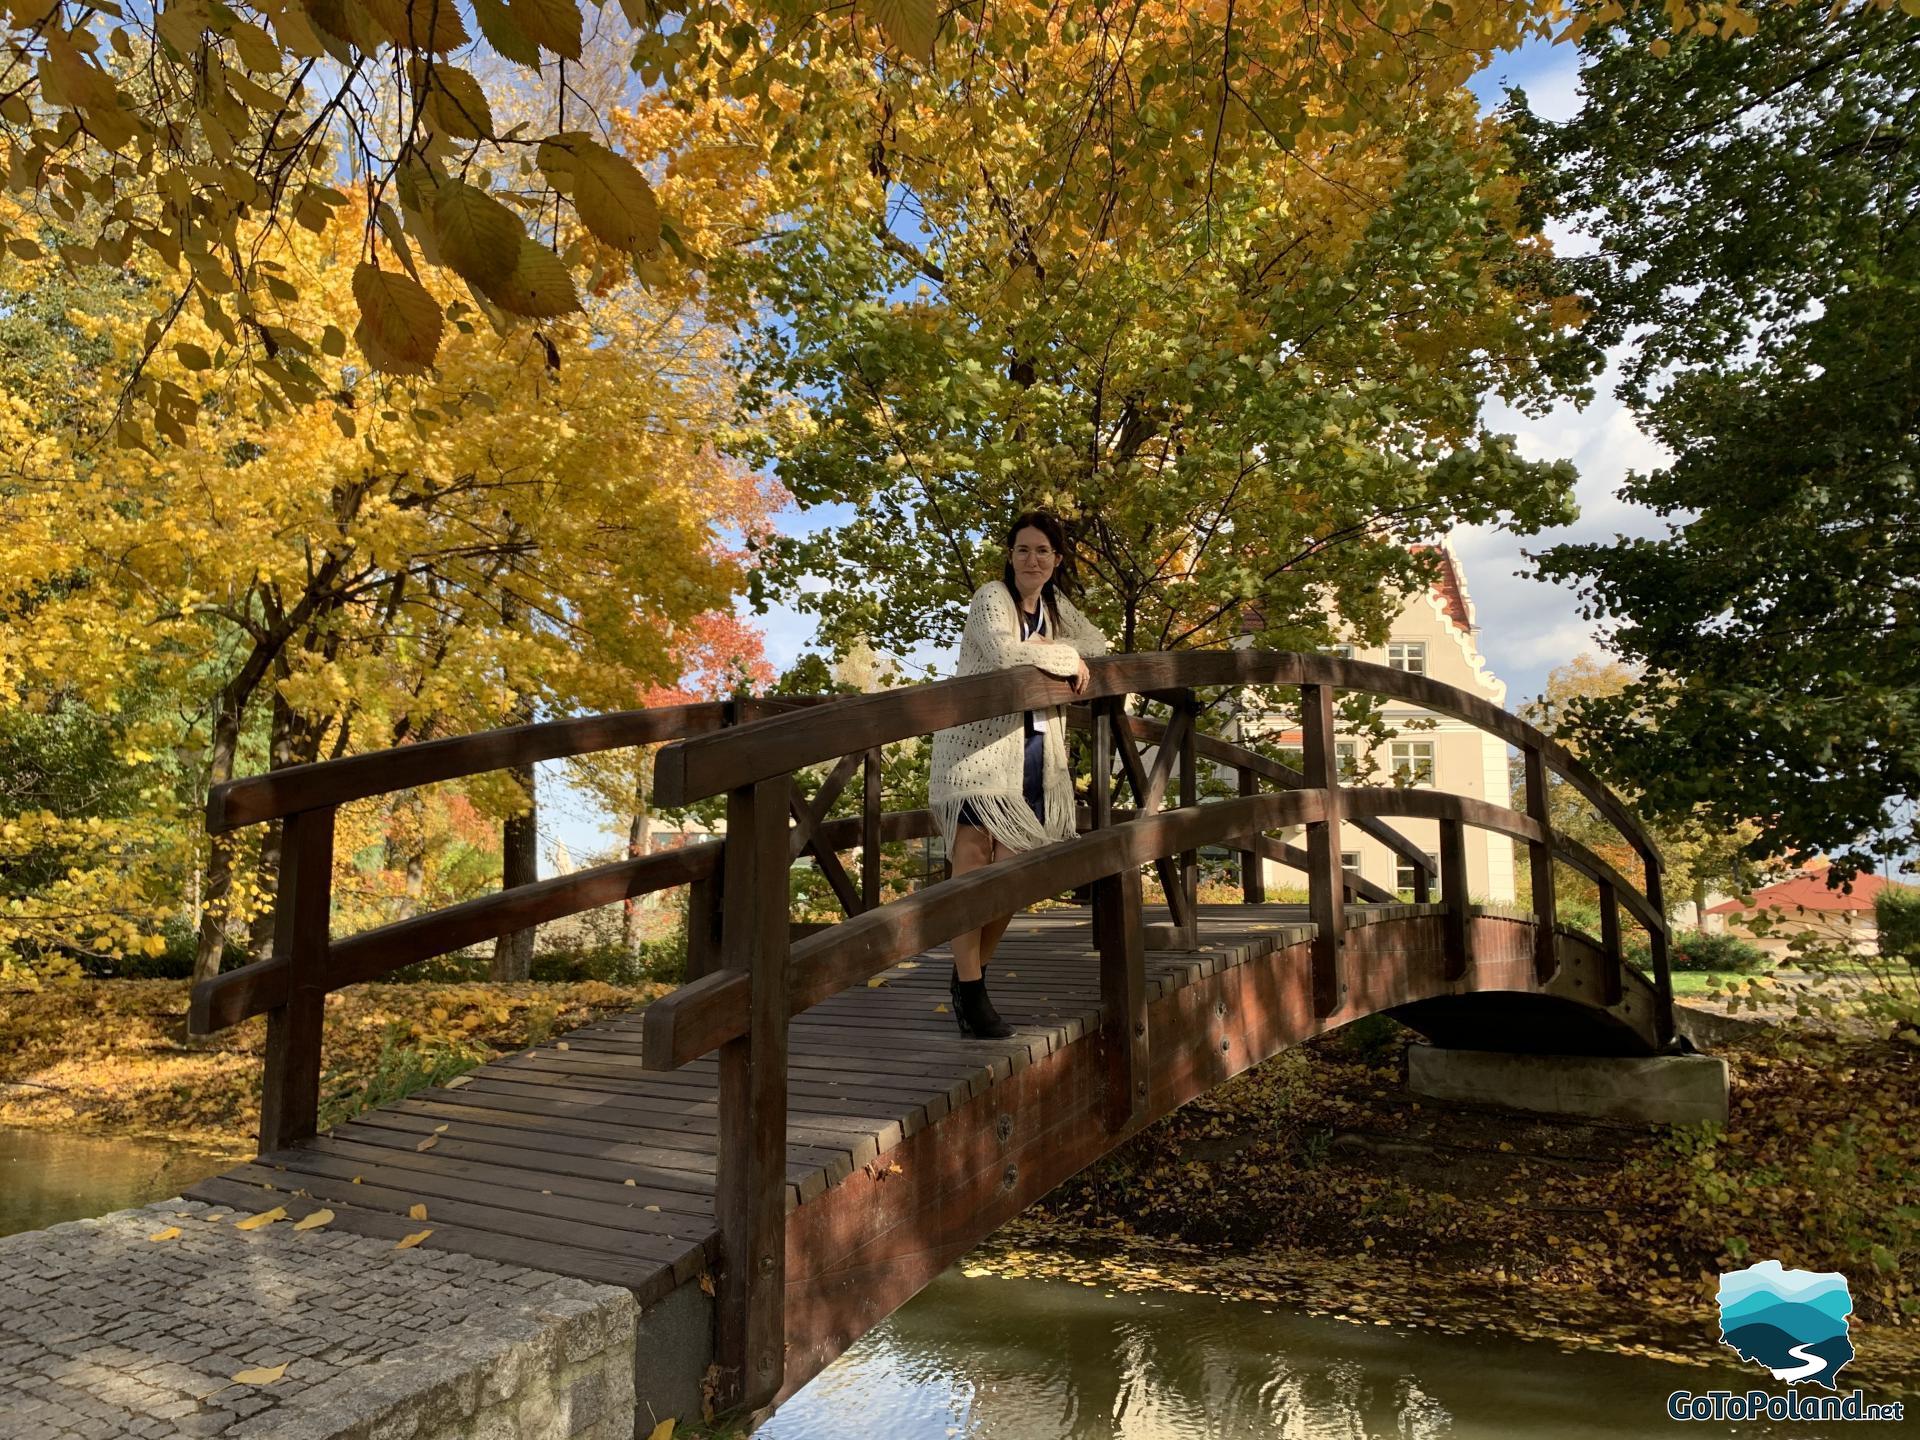 A woman standing on a small wooden bridge, trees with colourful leaves around her